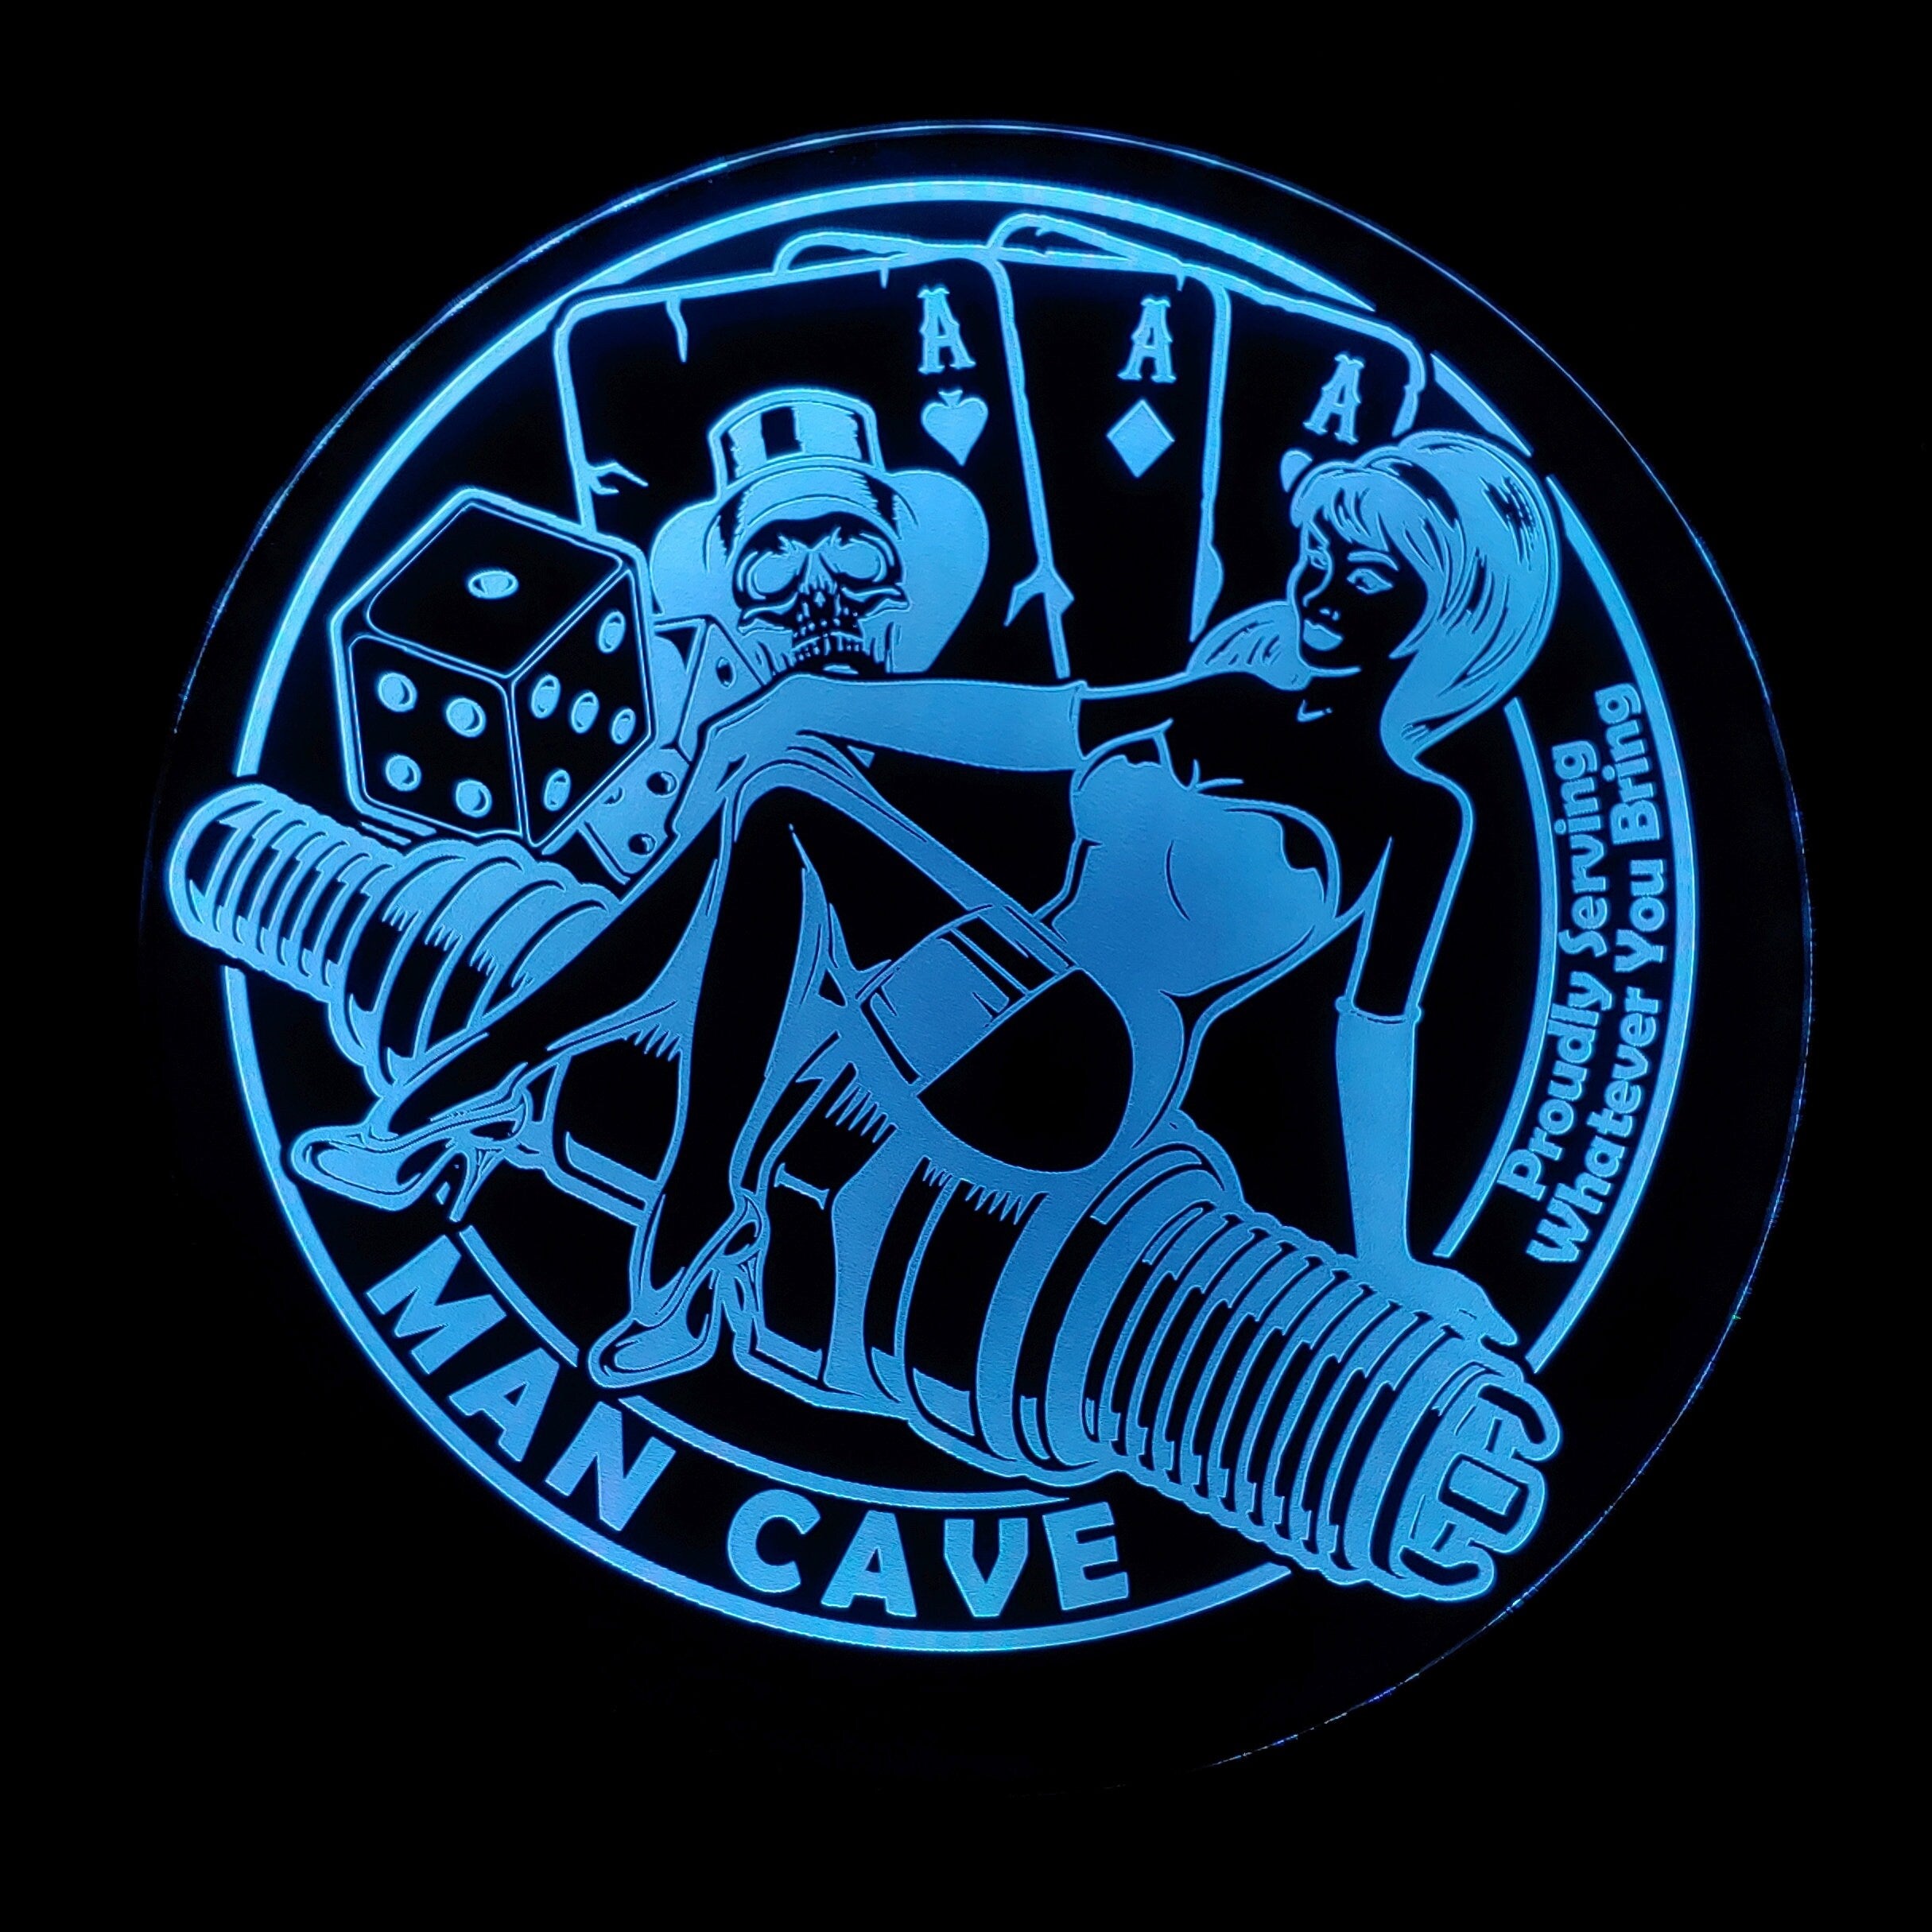 Man Cave LED Wall Sign Neon Like - Color Changing Remote Control - 6 Sizes Made in USA Free Shipping